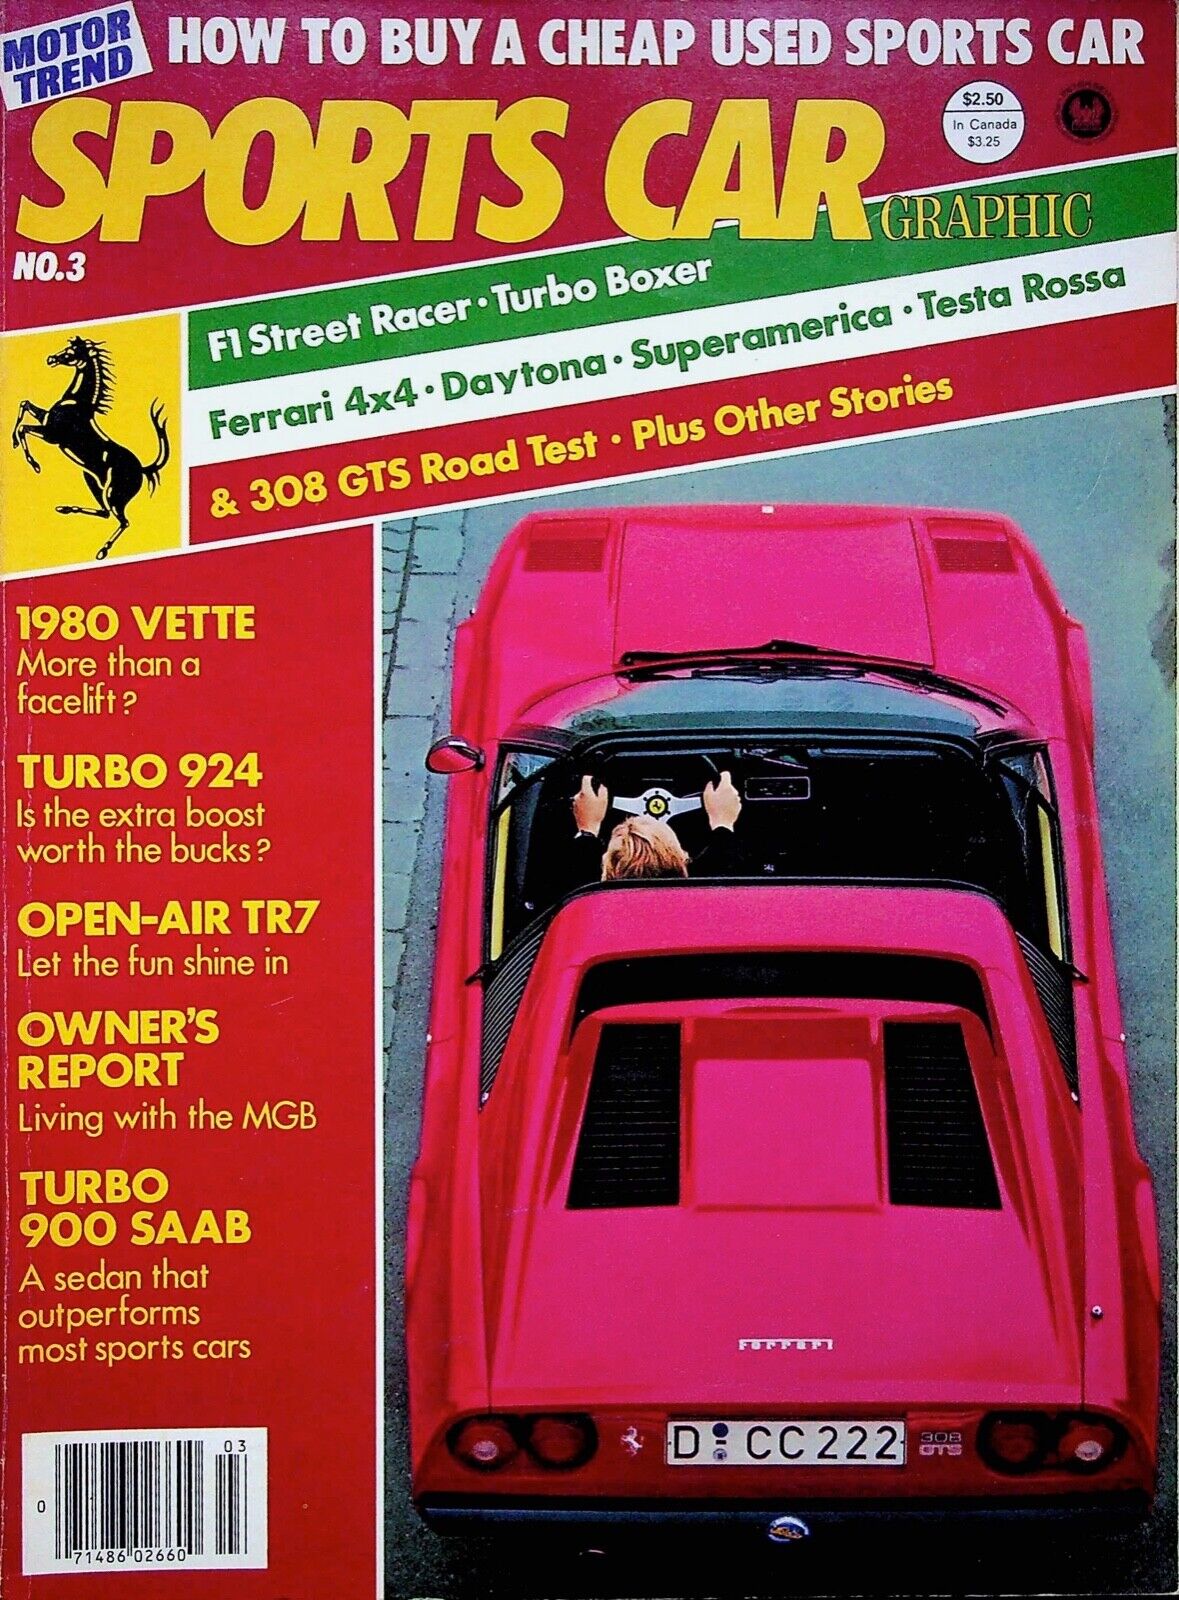 VINTAGE HOW TO BUY A CHEAP USED SPORTS CAR - SPORTS CAR INTERNATIONAL, FALL 1979